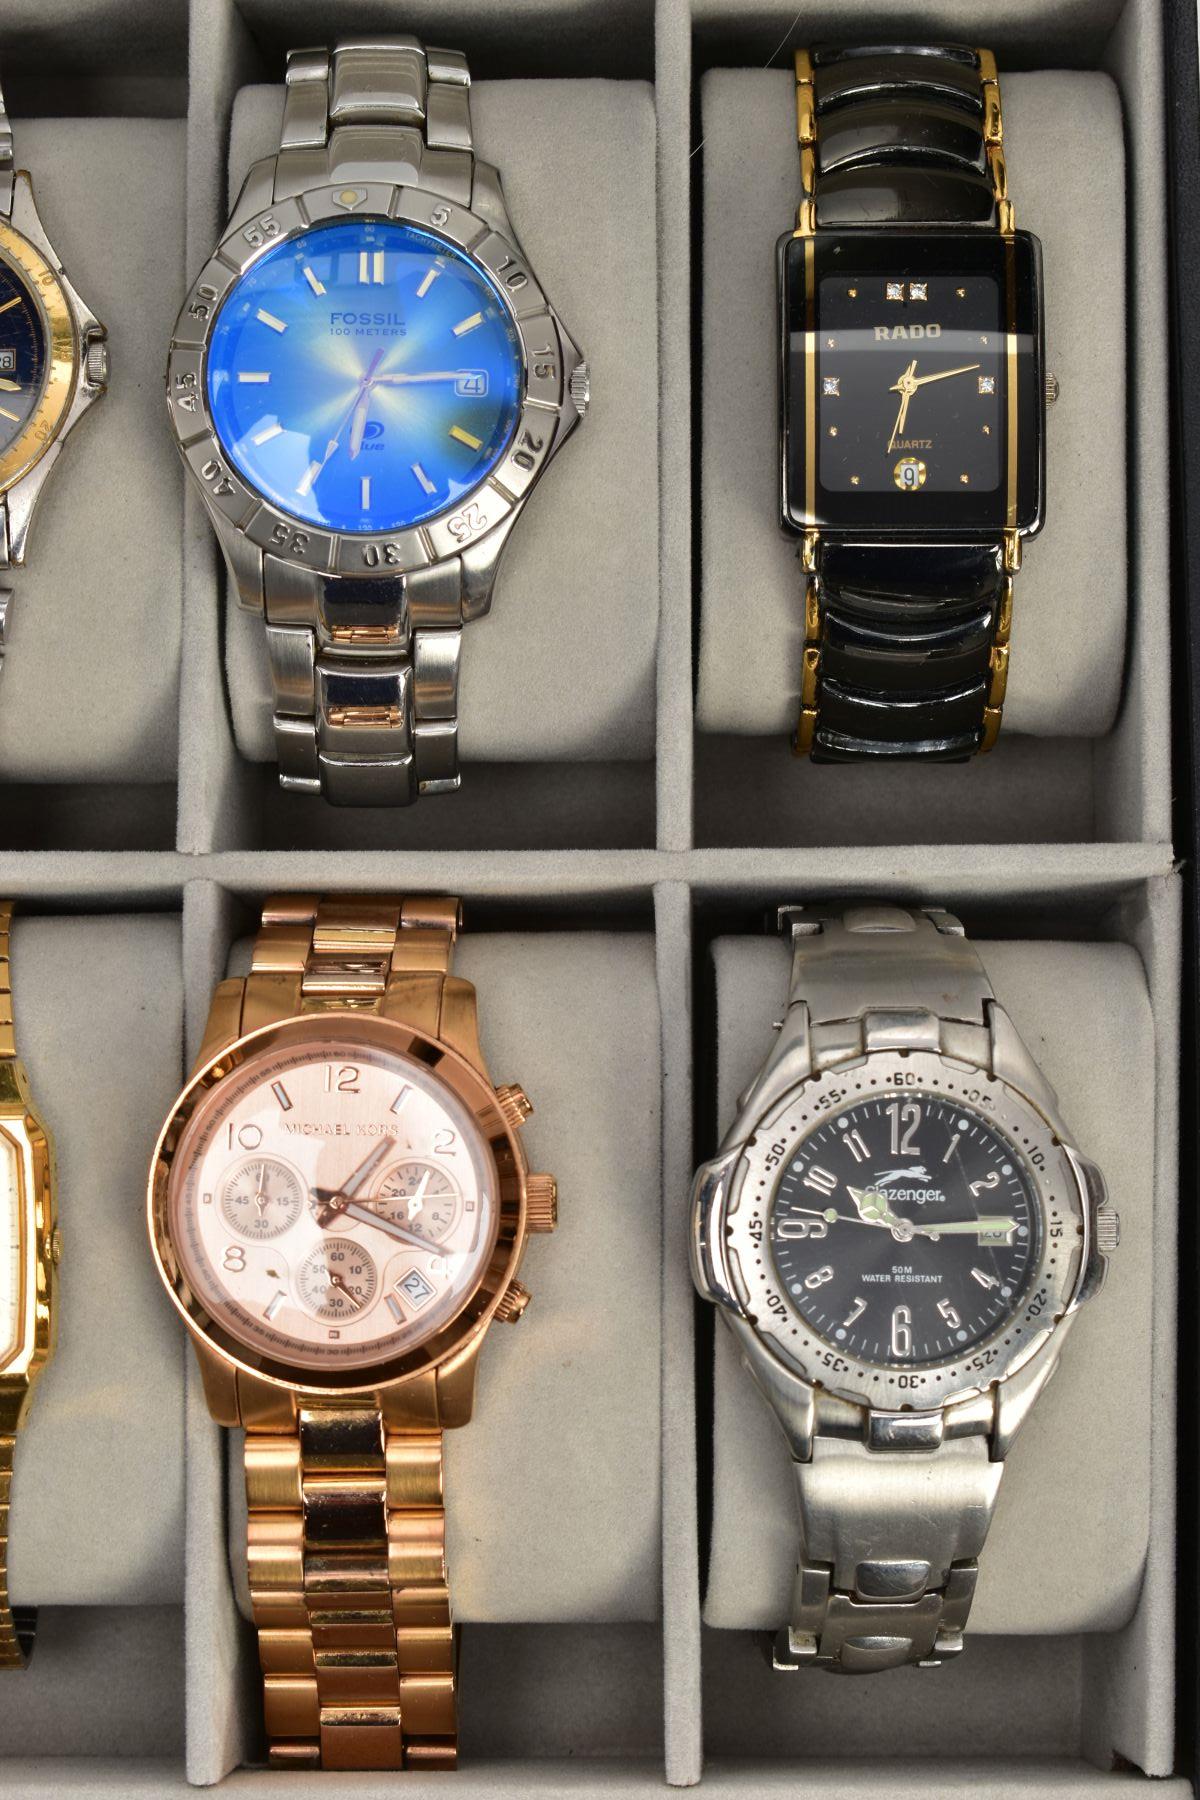 SELECTION OF WATCHES IN A DISPLAY BOX, display box encasing ten watches, names to include Casio, - Image 2 of 4